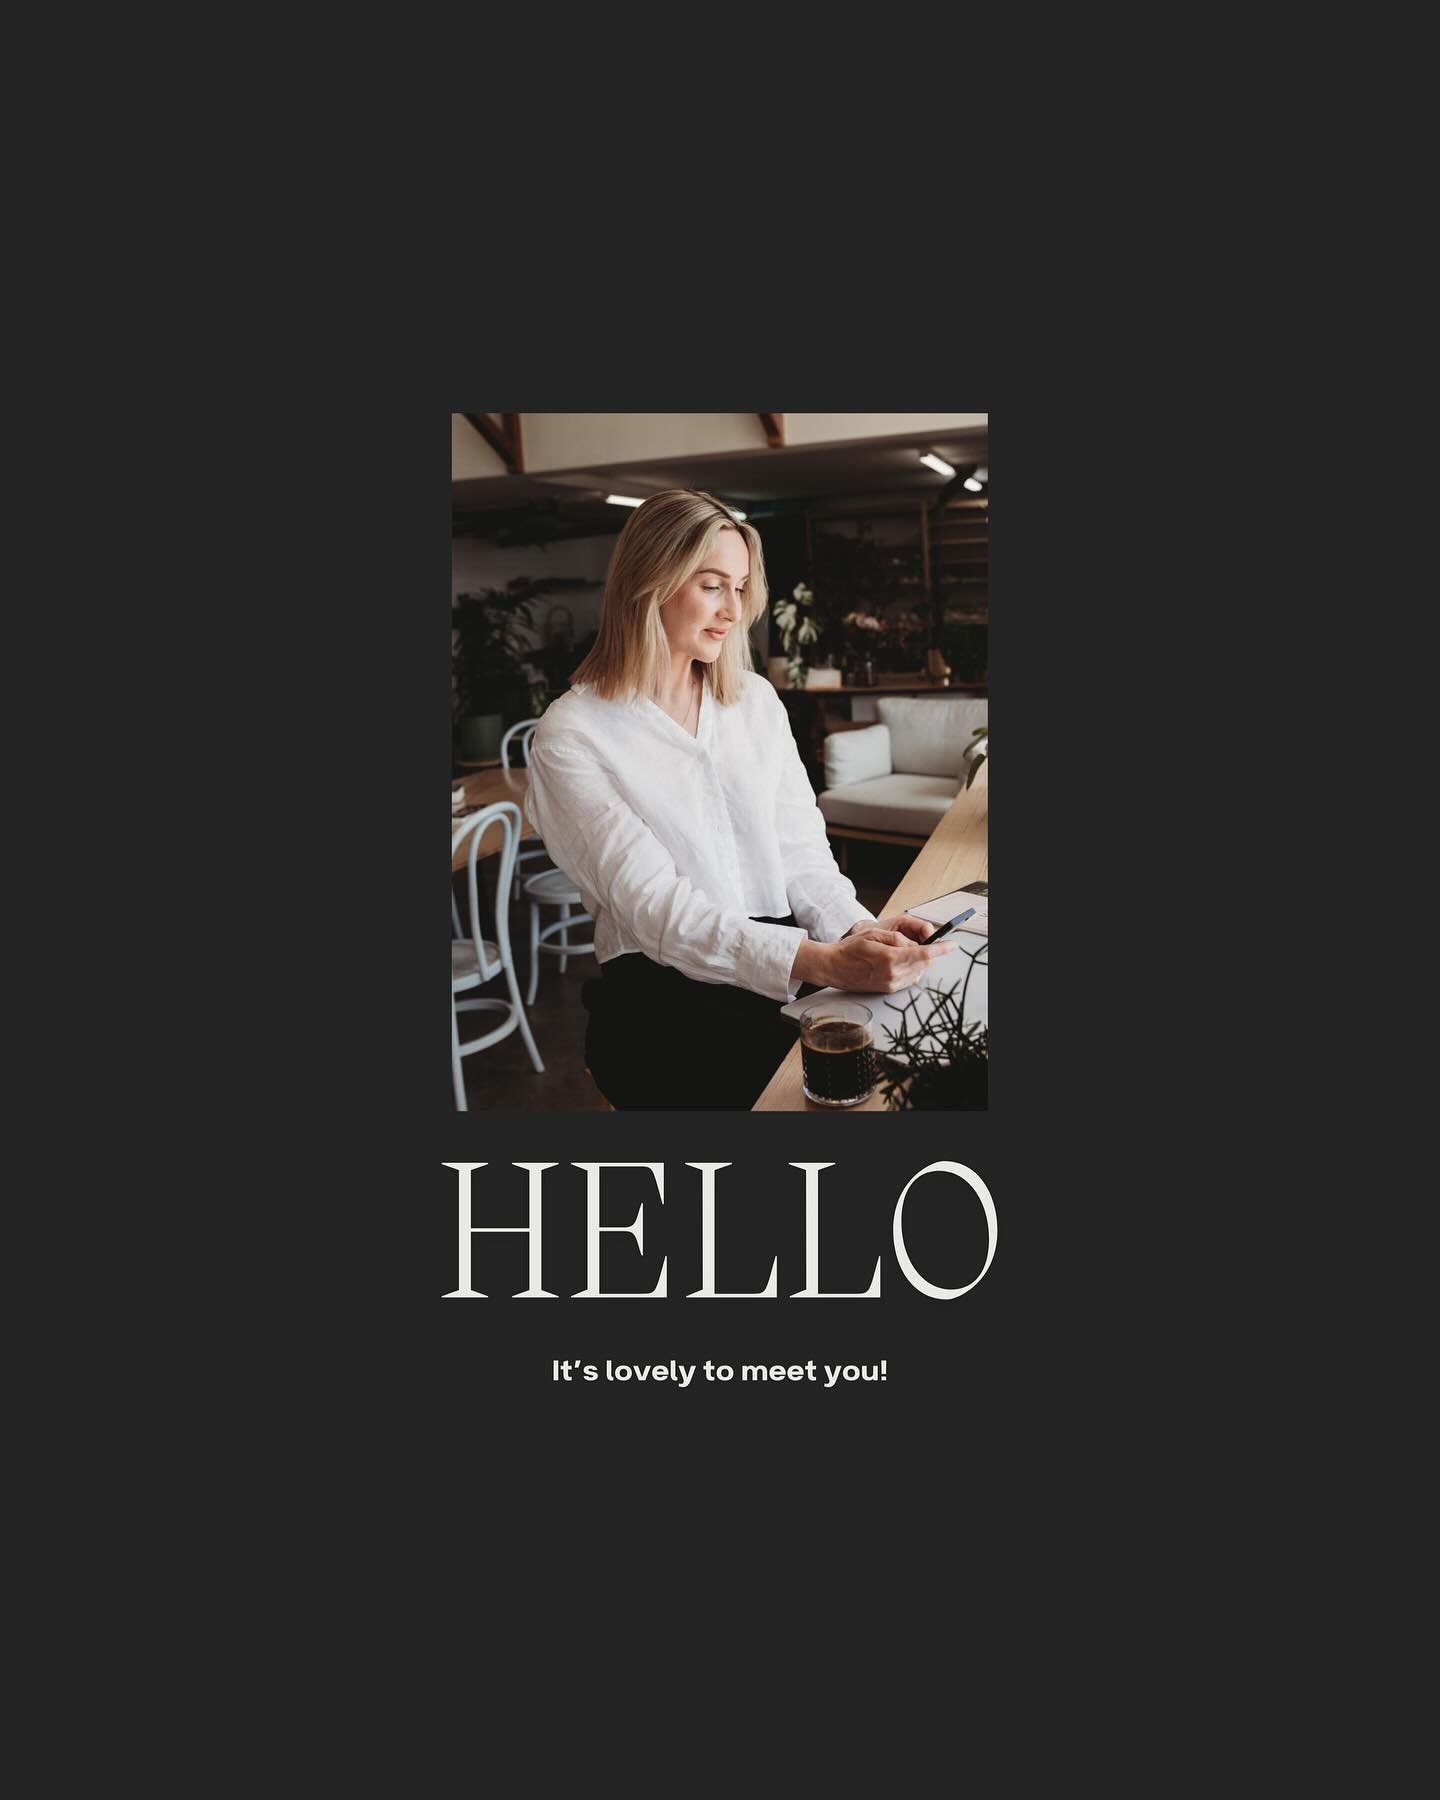 Hi👋🏼 I&rsquo;m Jess, the creative brain behind Silo Studio. I started this business originally as a side-hustle that has evolved organically and become my full time job. I LOVE it and have to pinch myself that this is what I get to do everyday. I c